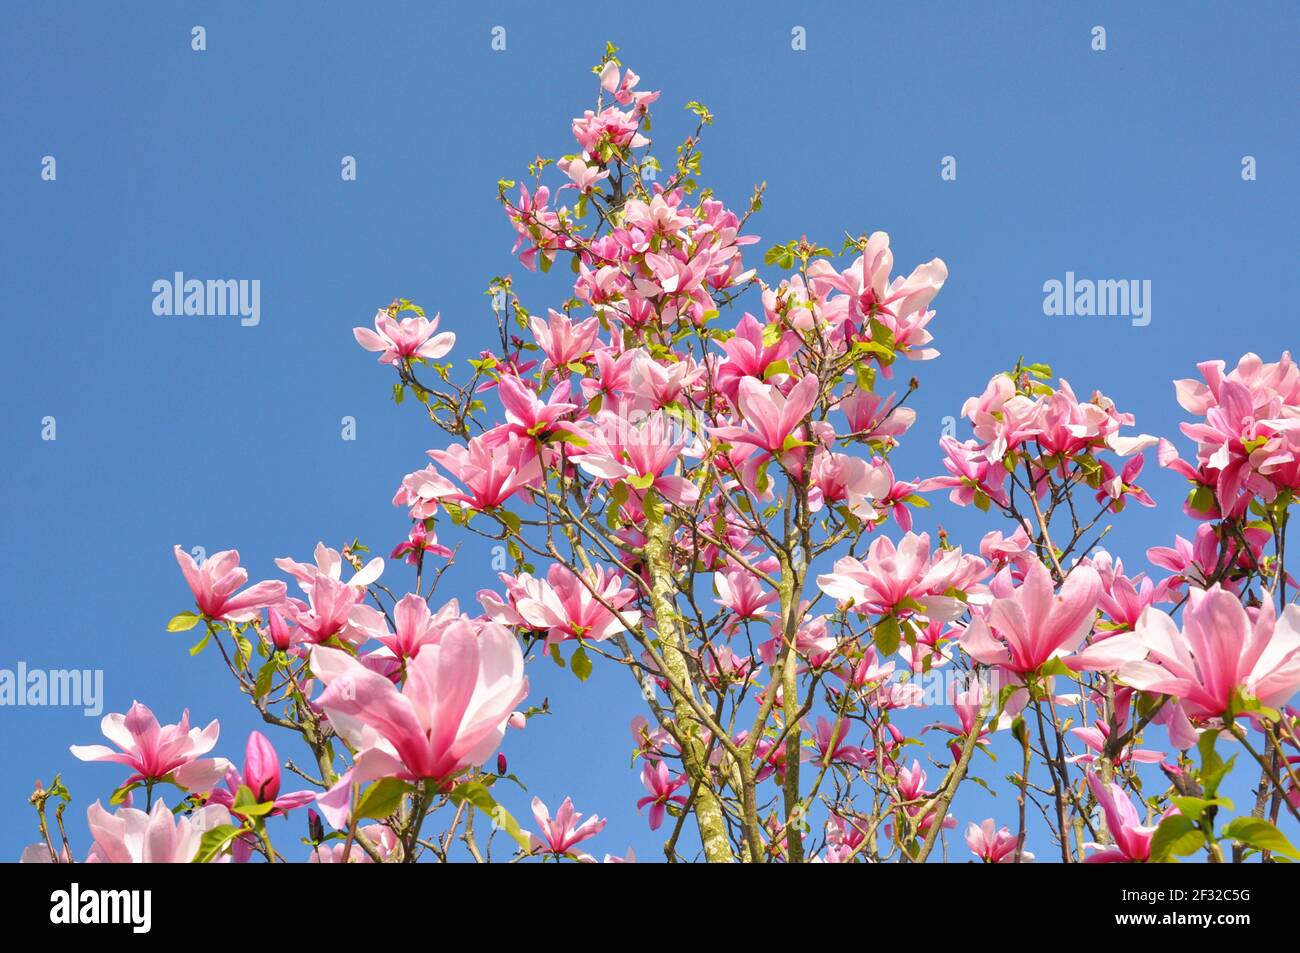 Magnolia tree blossom. Magnolia Susan, pink flowers. Spring flowering against the blue sky. Stock Photo